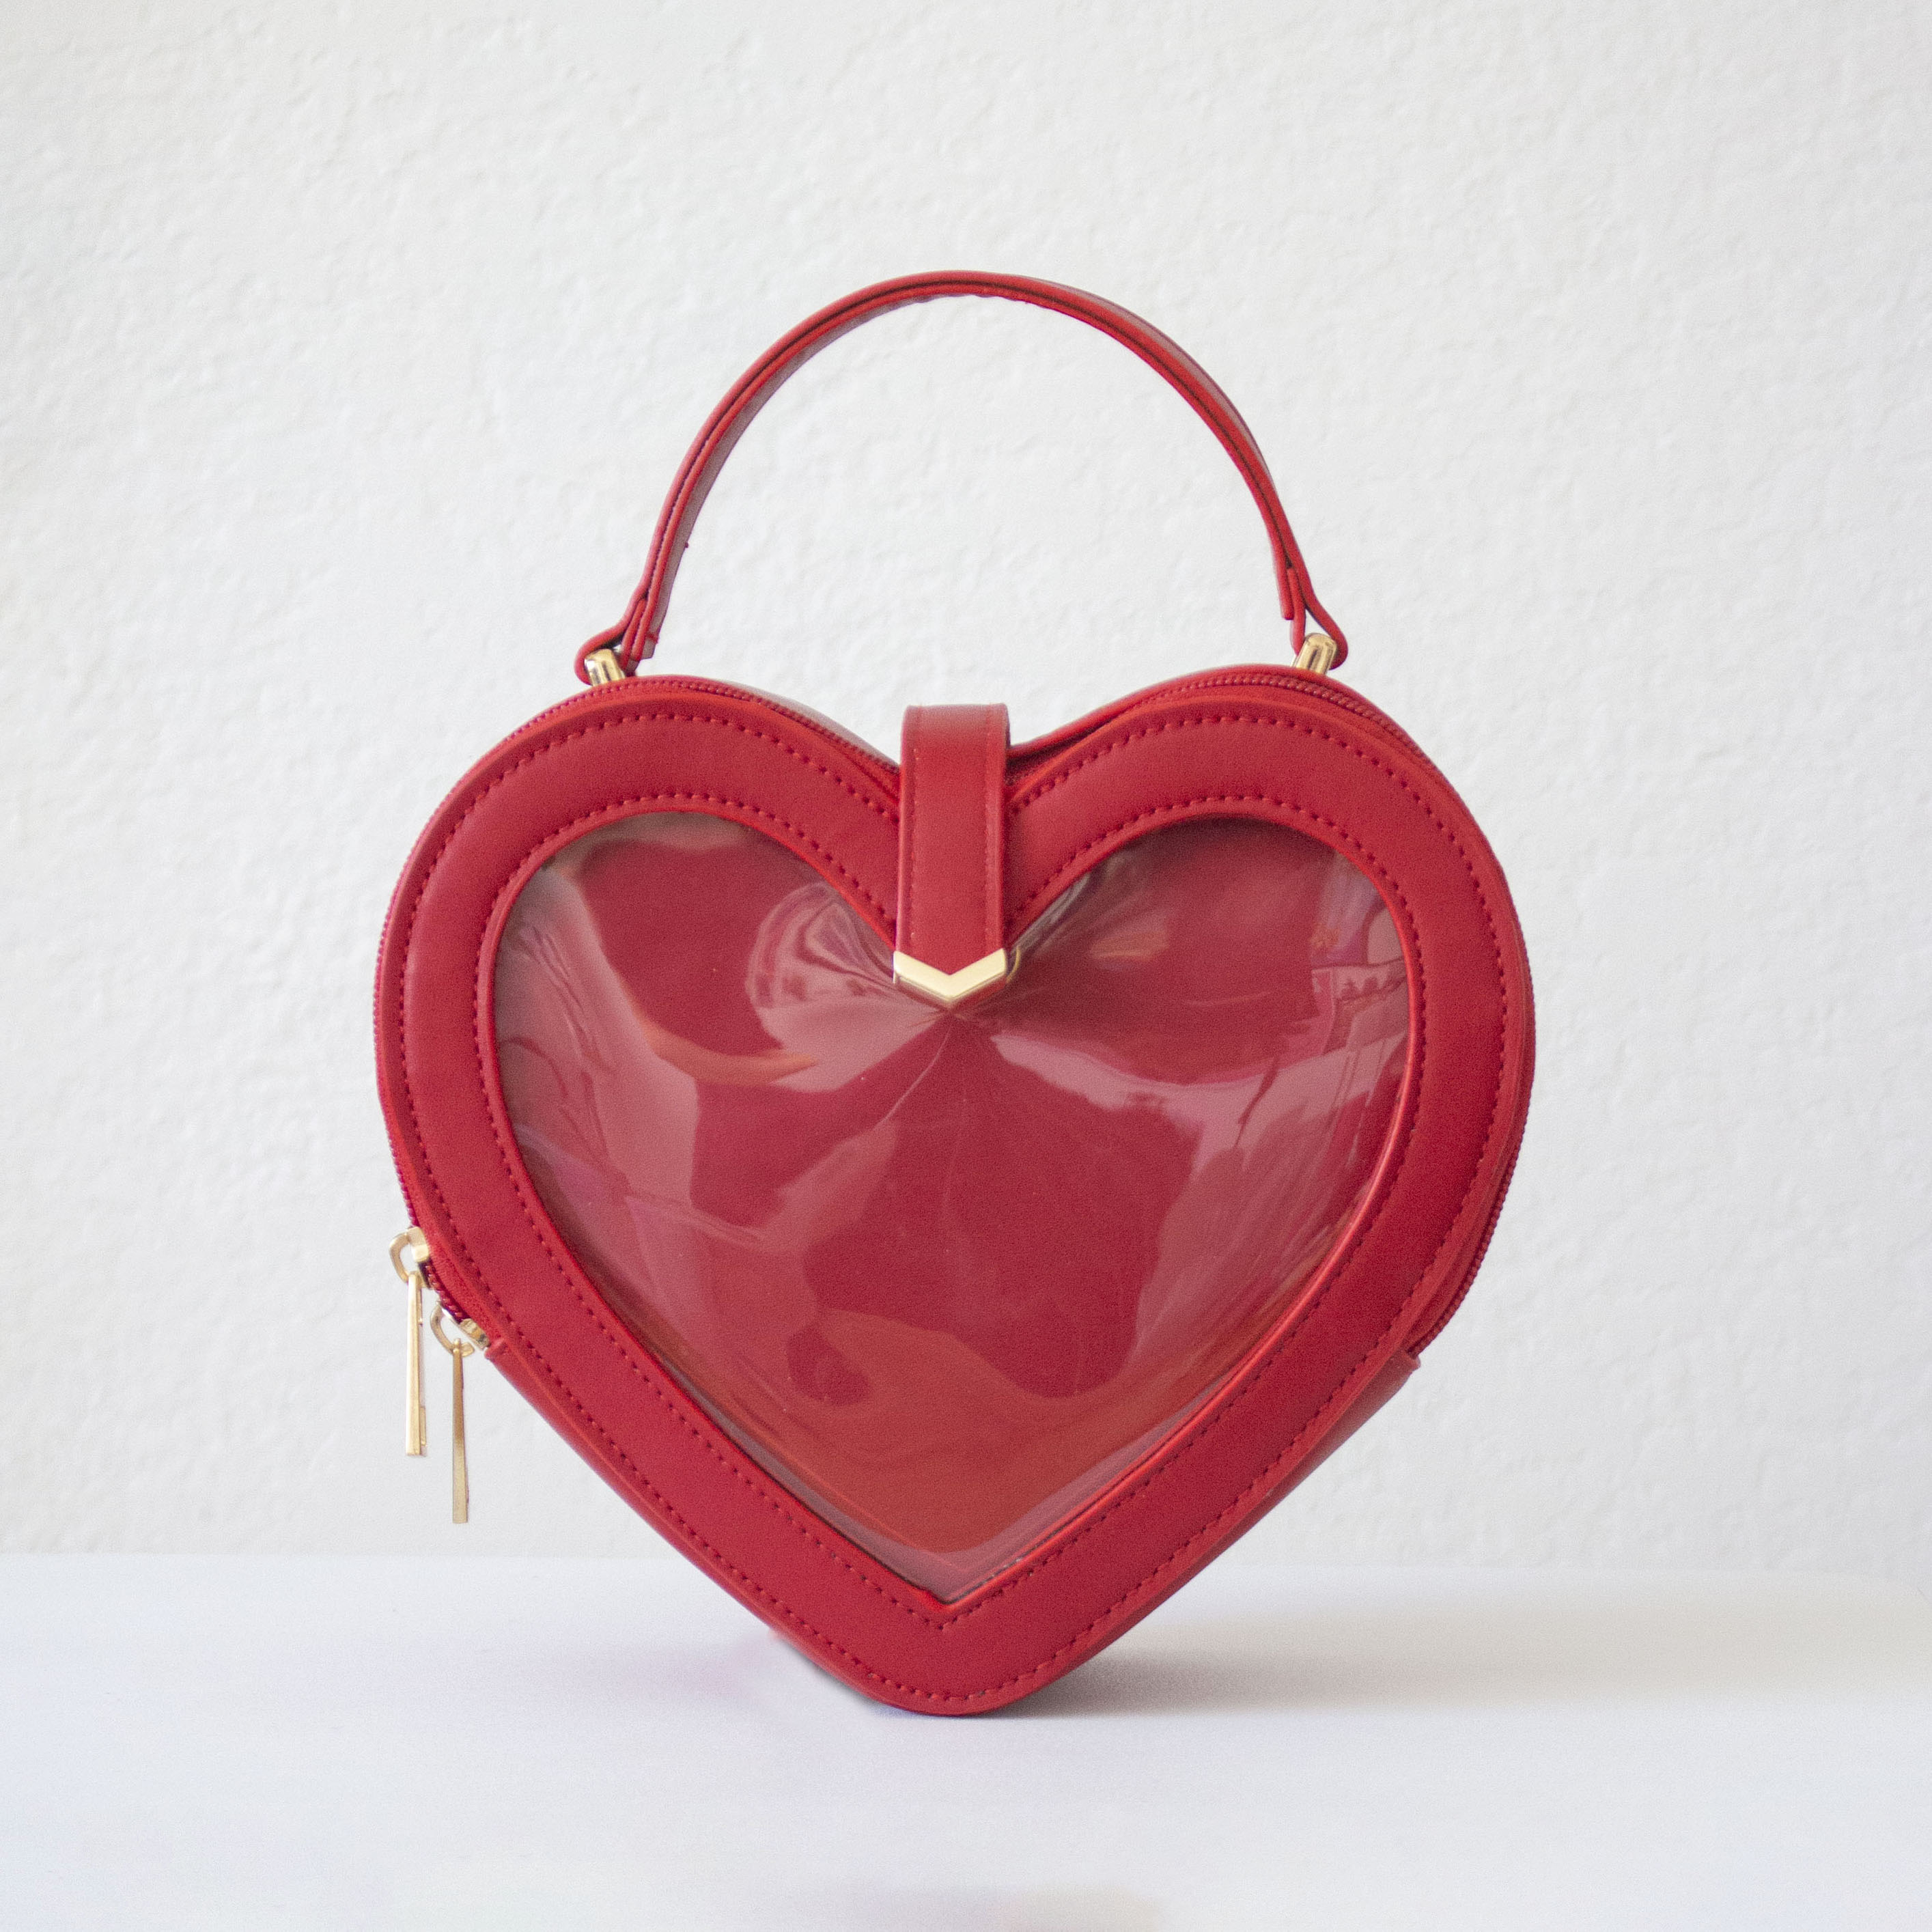 Red Heart Ita Bag on white background